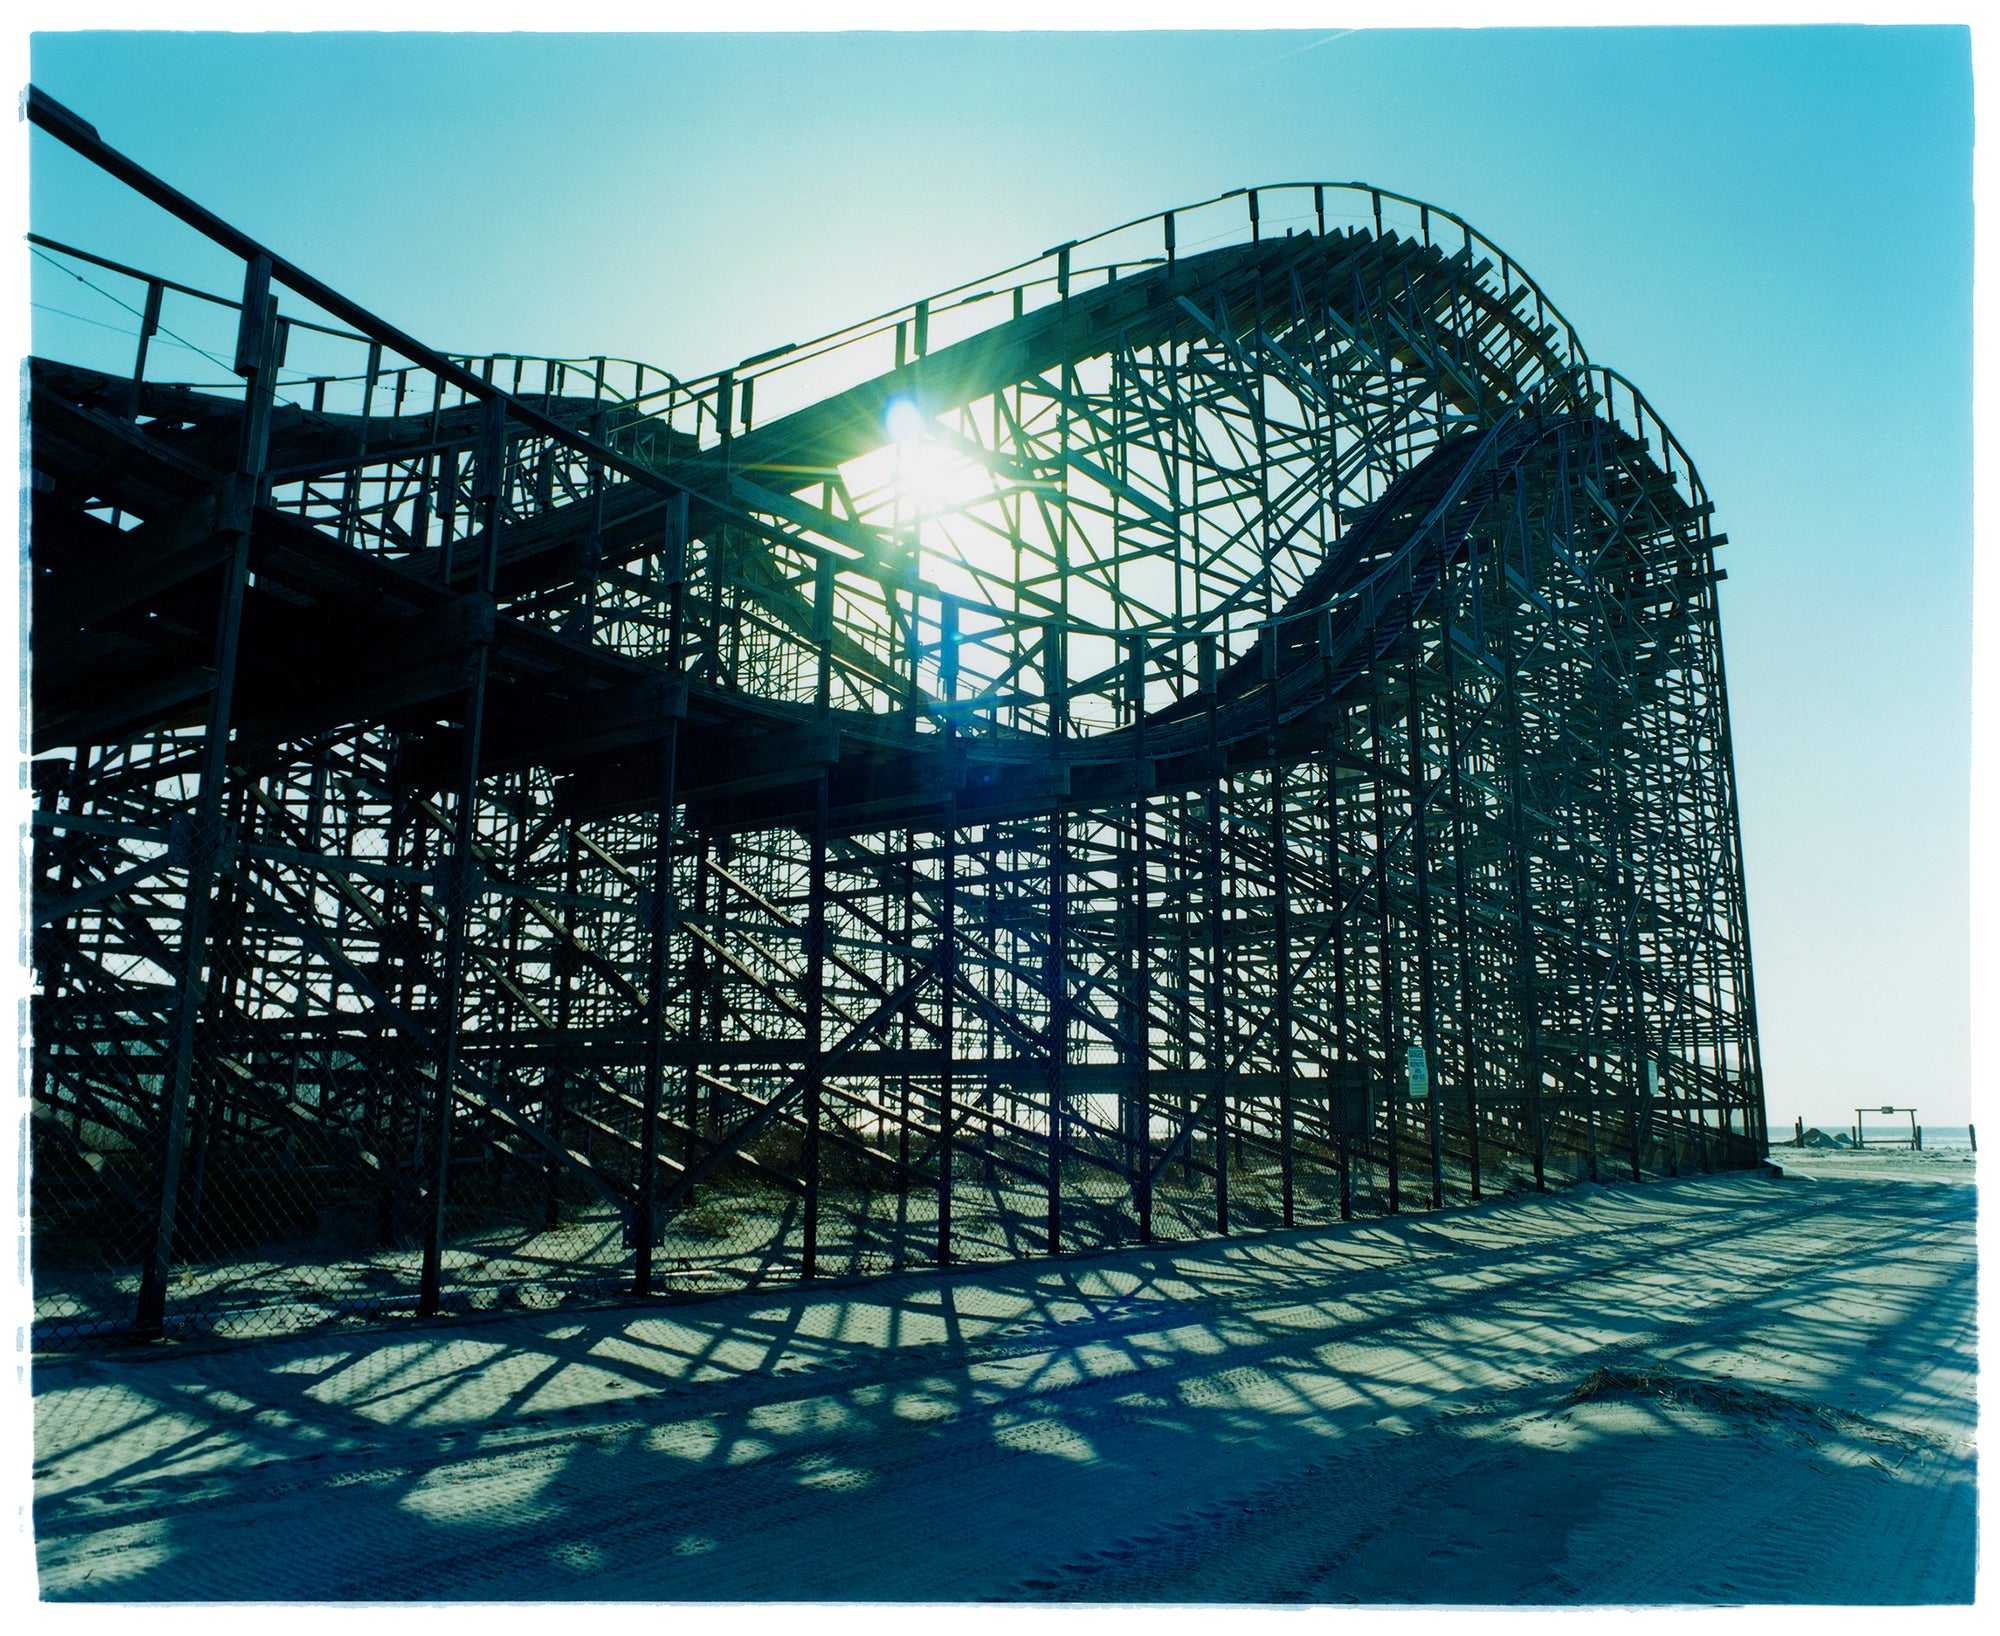 Photograph by Richard Heeps. Great White Roller coaster sits empty on the beach in the setting sun.